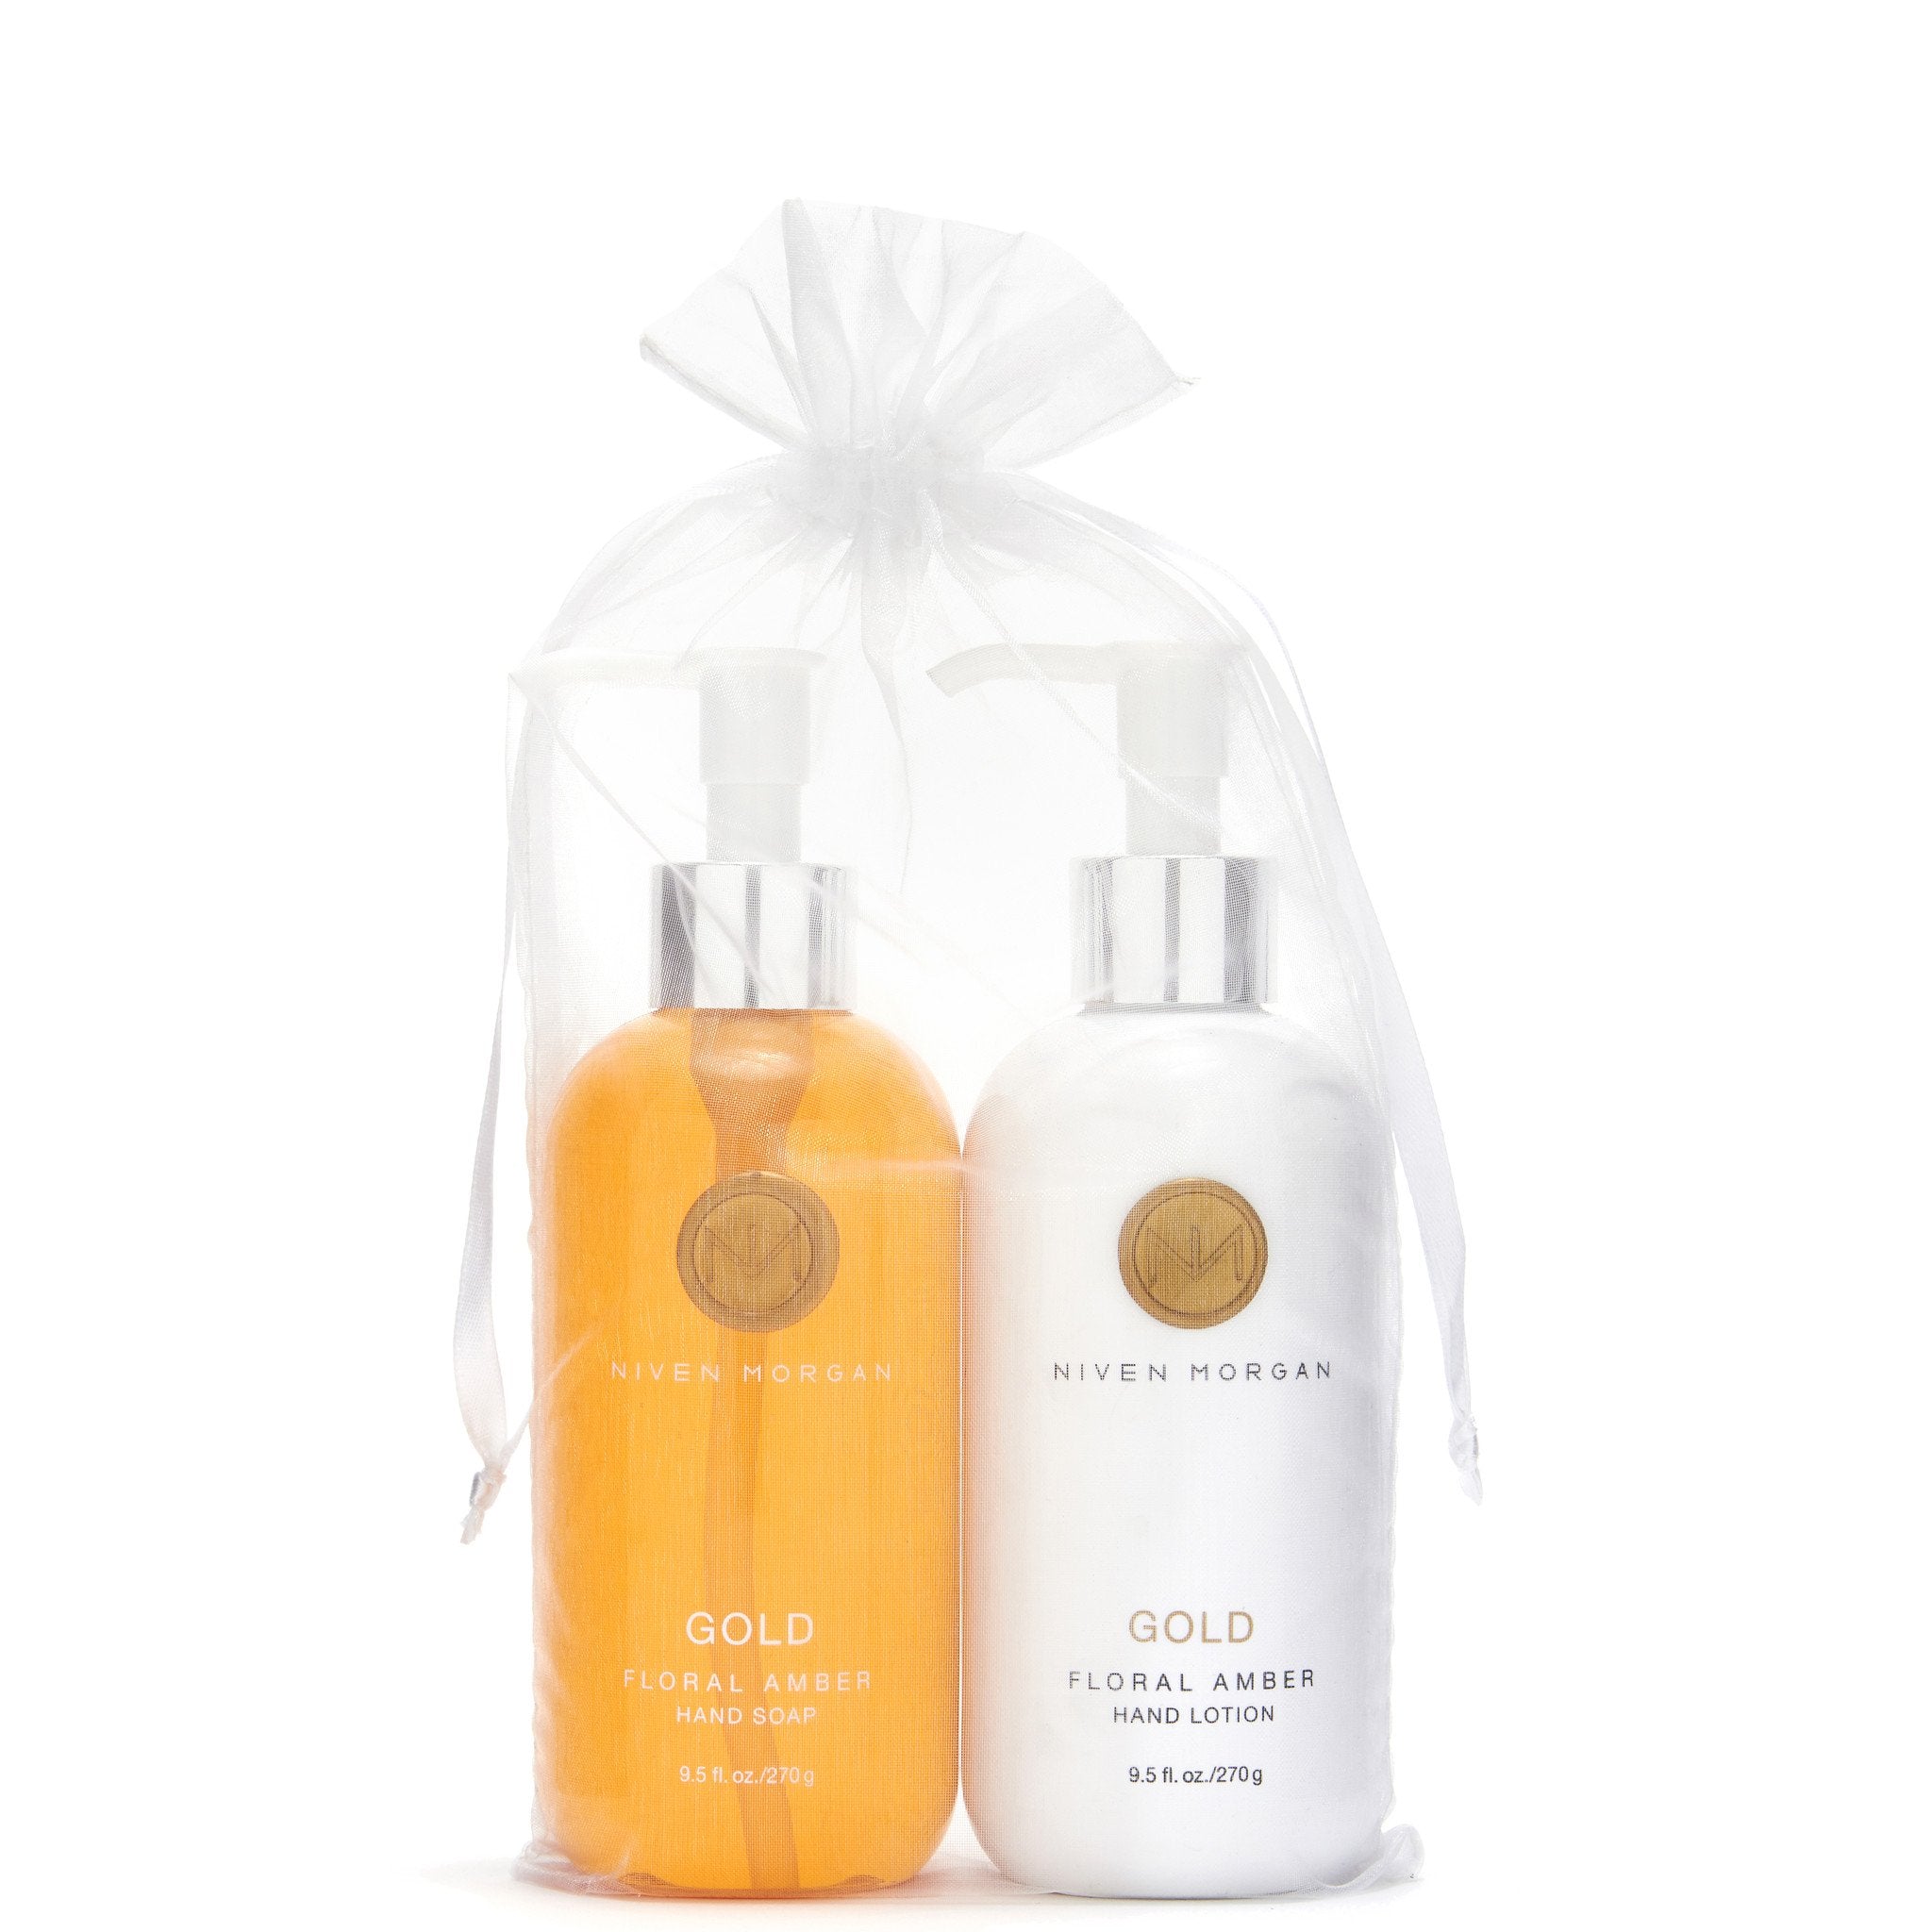 Gold Hand Soap & Hand Lotion Set